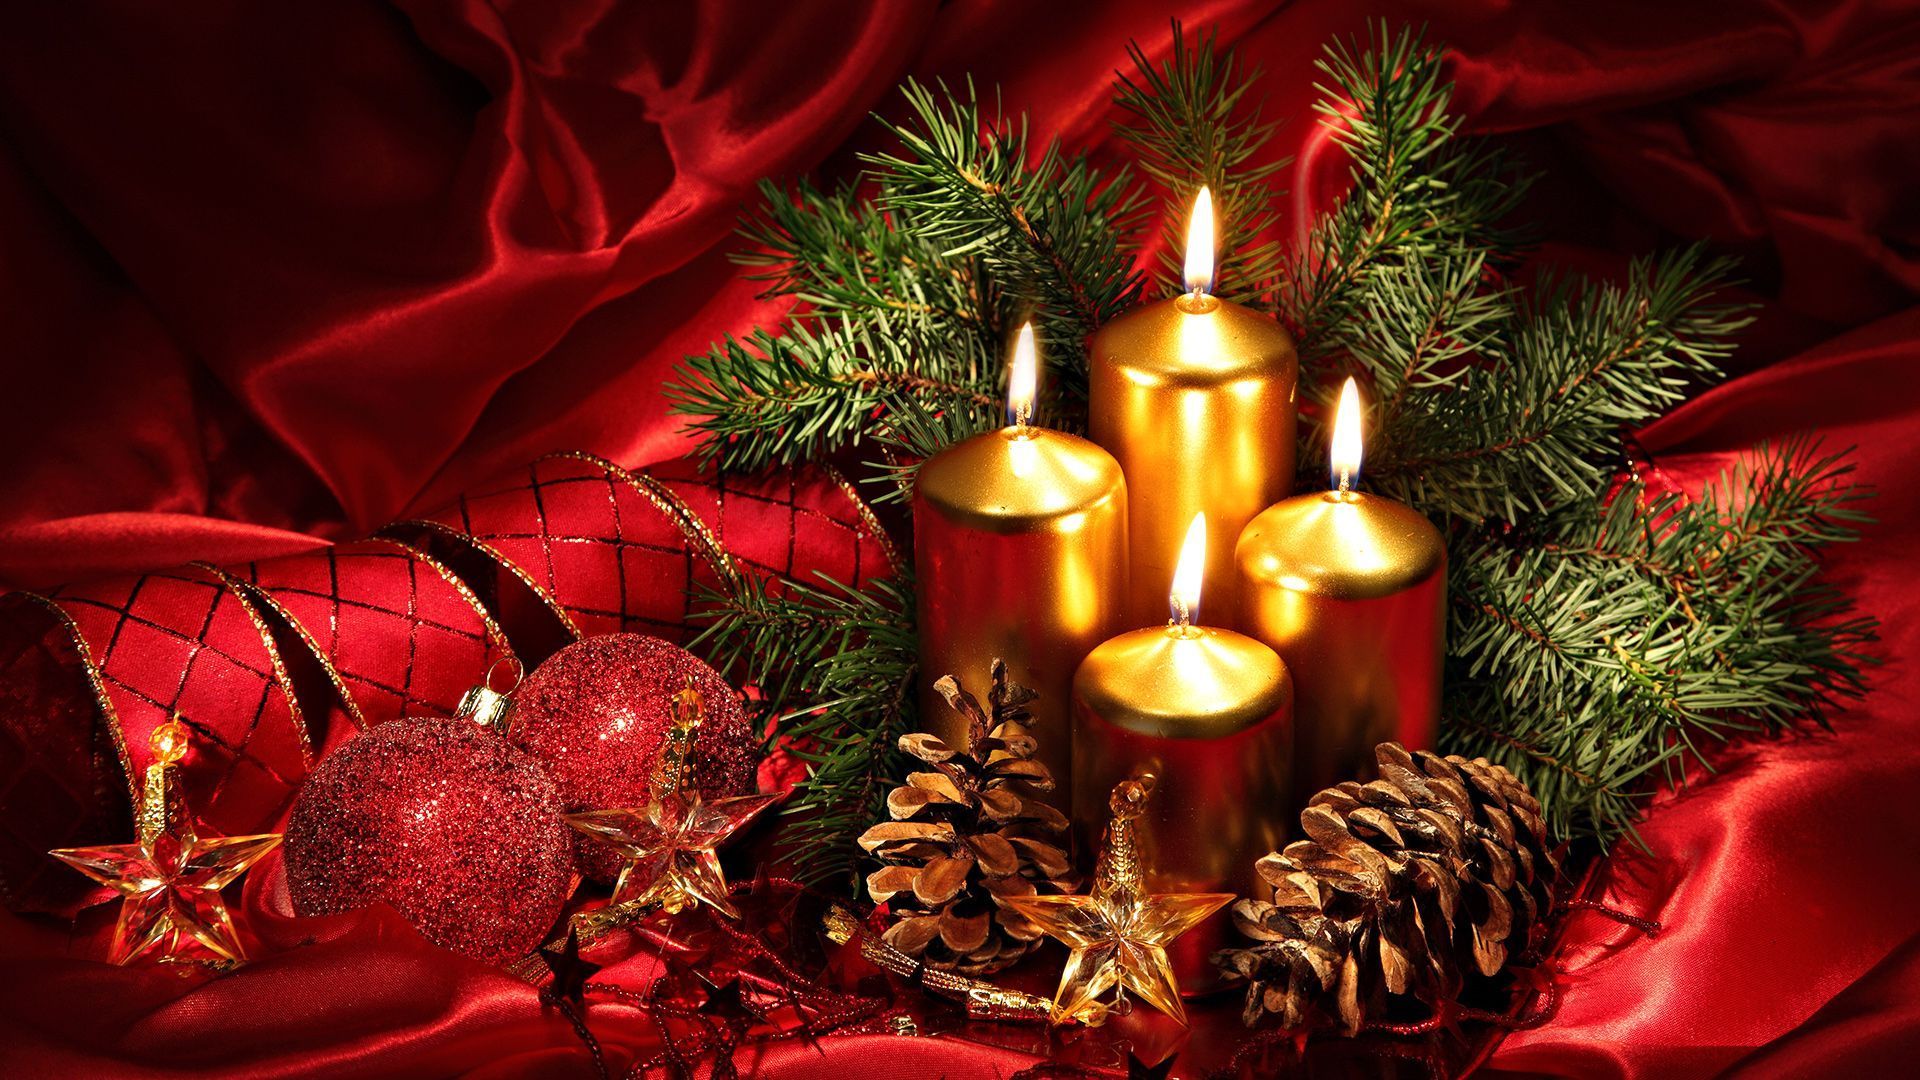 Hd Christmas wallpapers - photos, pictures, images, pics Full